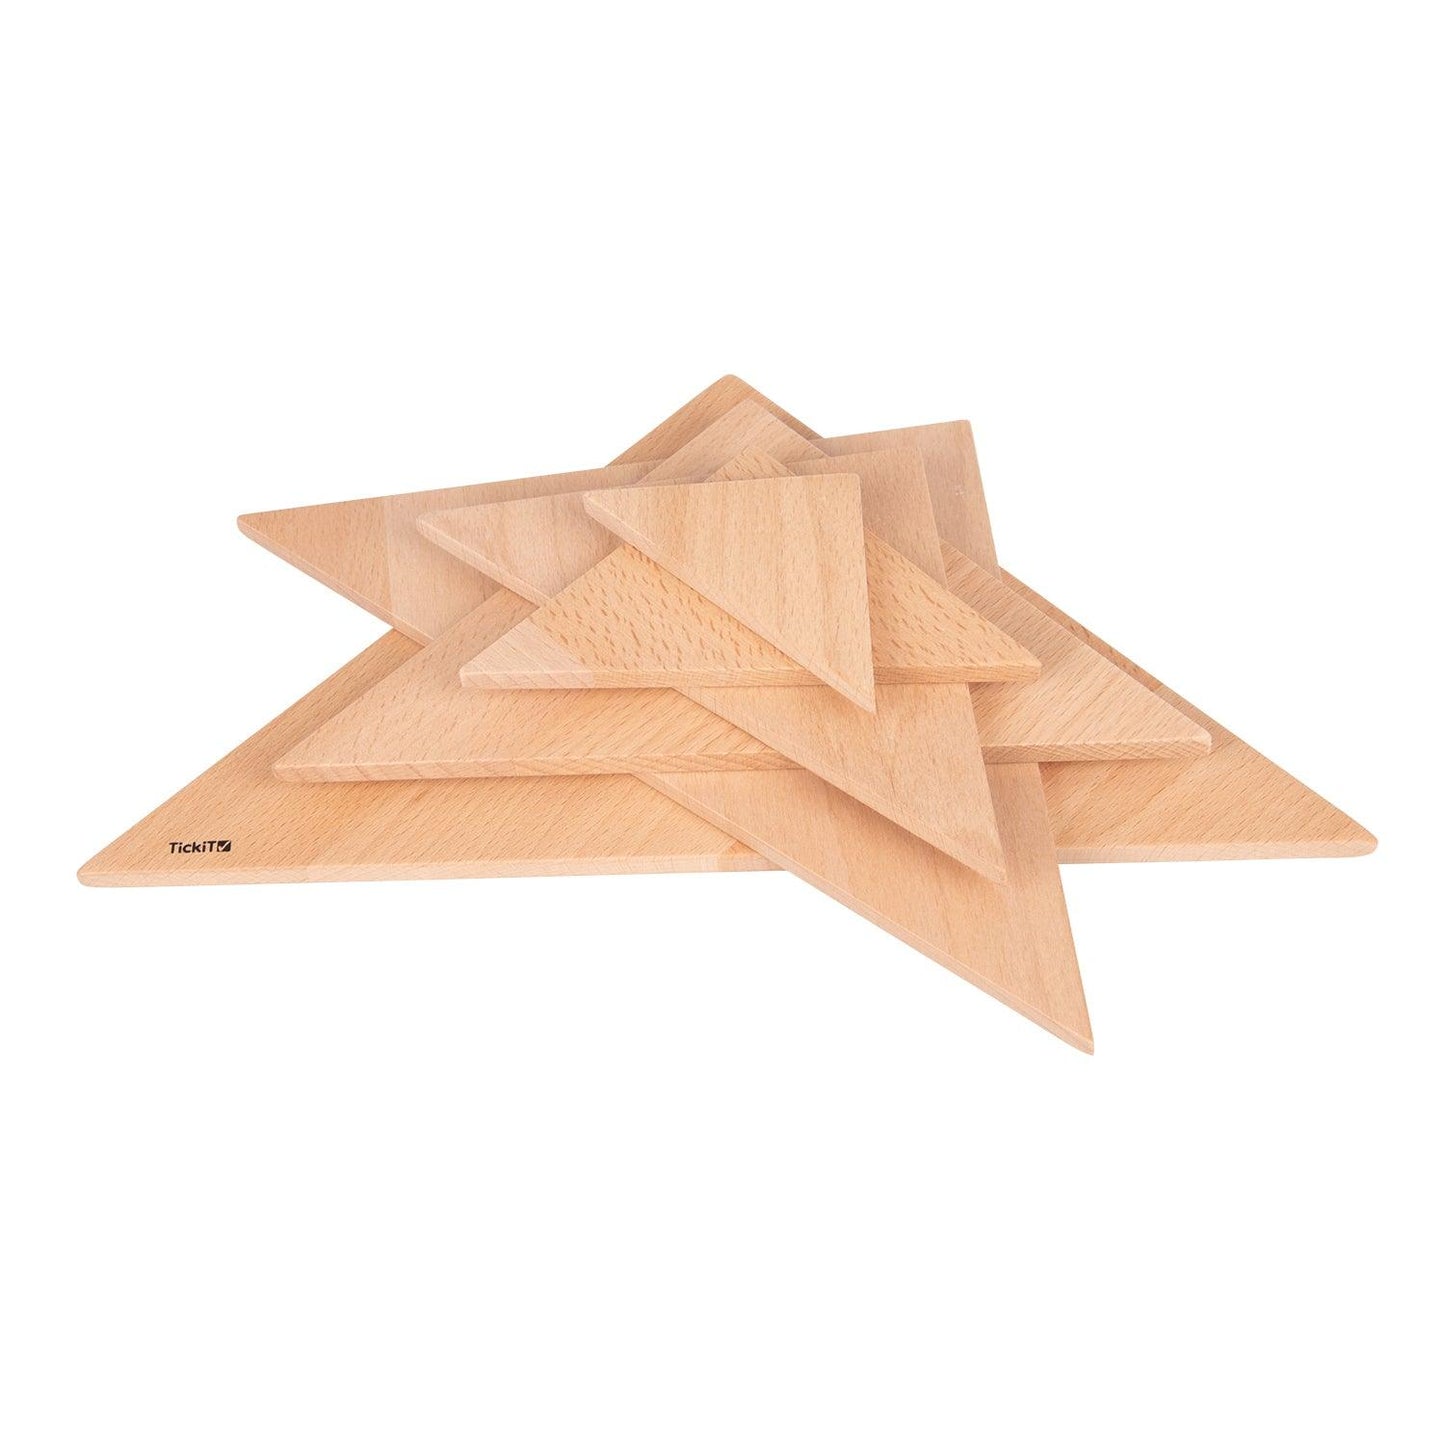 Natural Architect Panels - Triangles - Set of 6 - Loomini